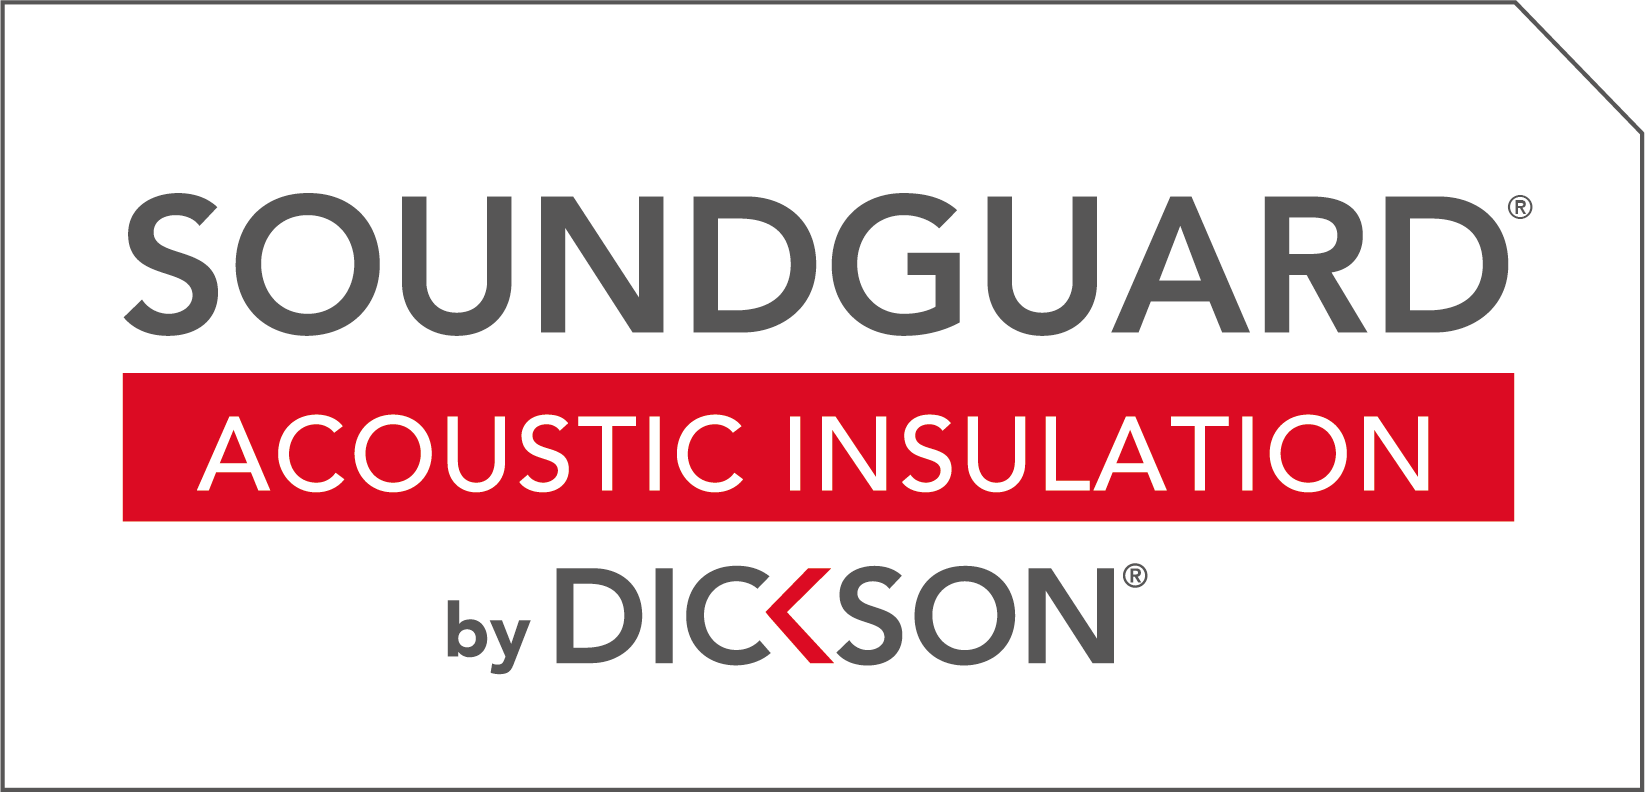 acoustic-insulation-dickson